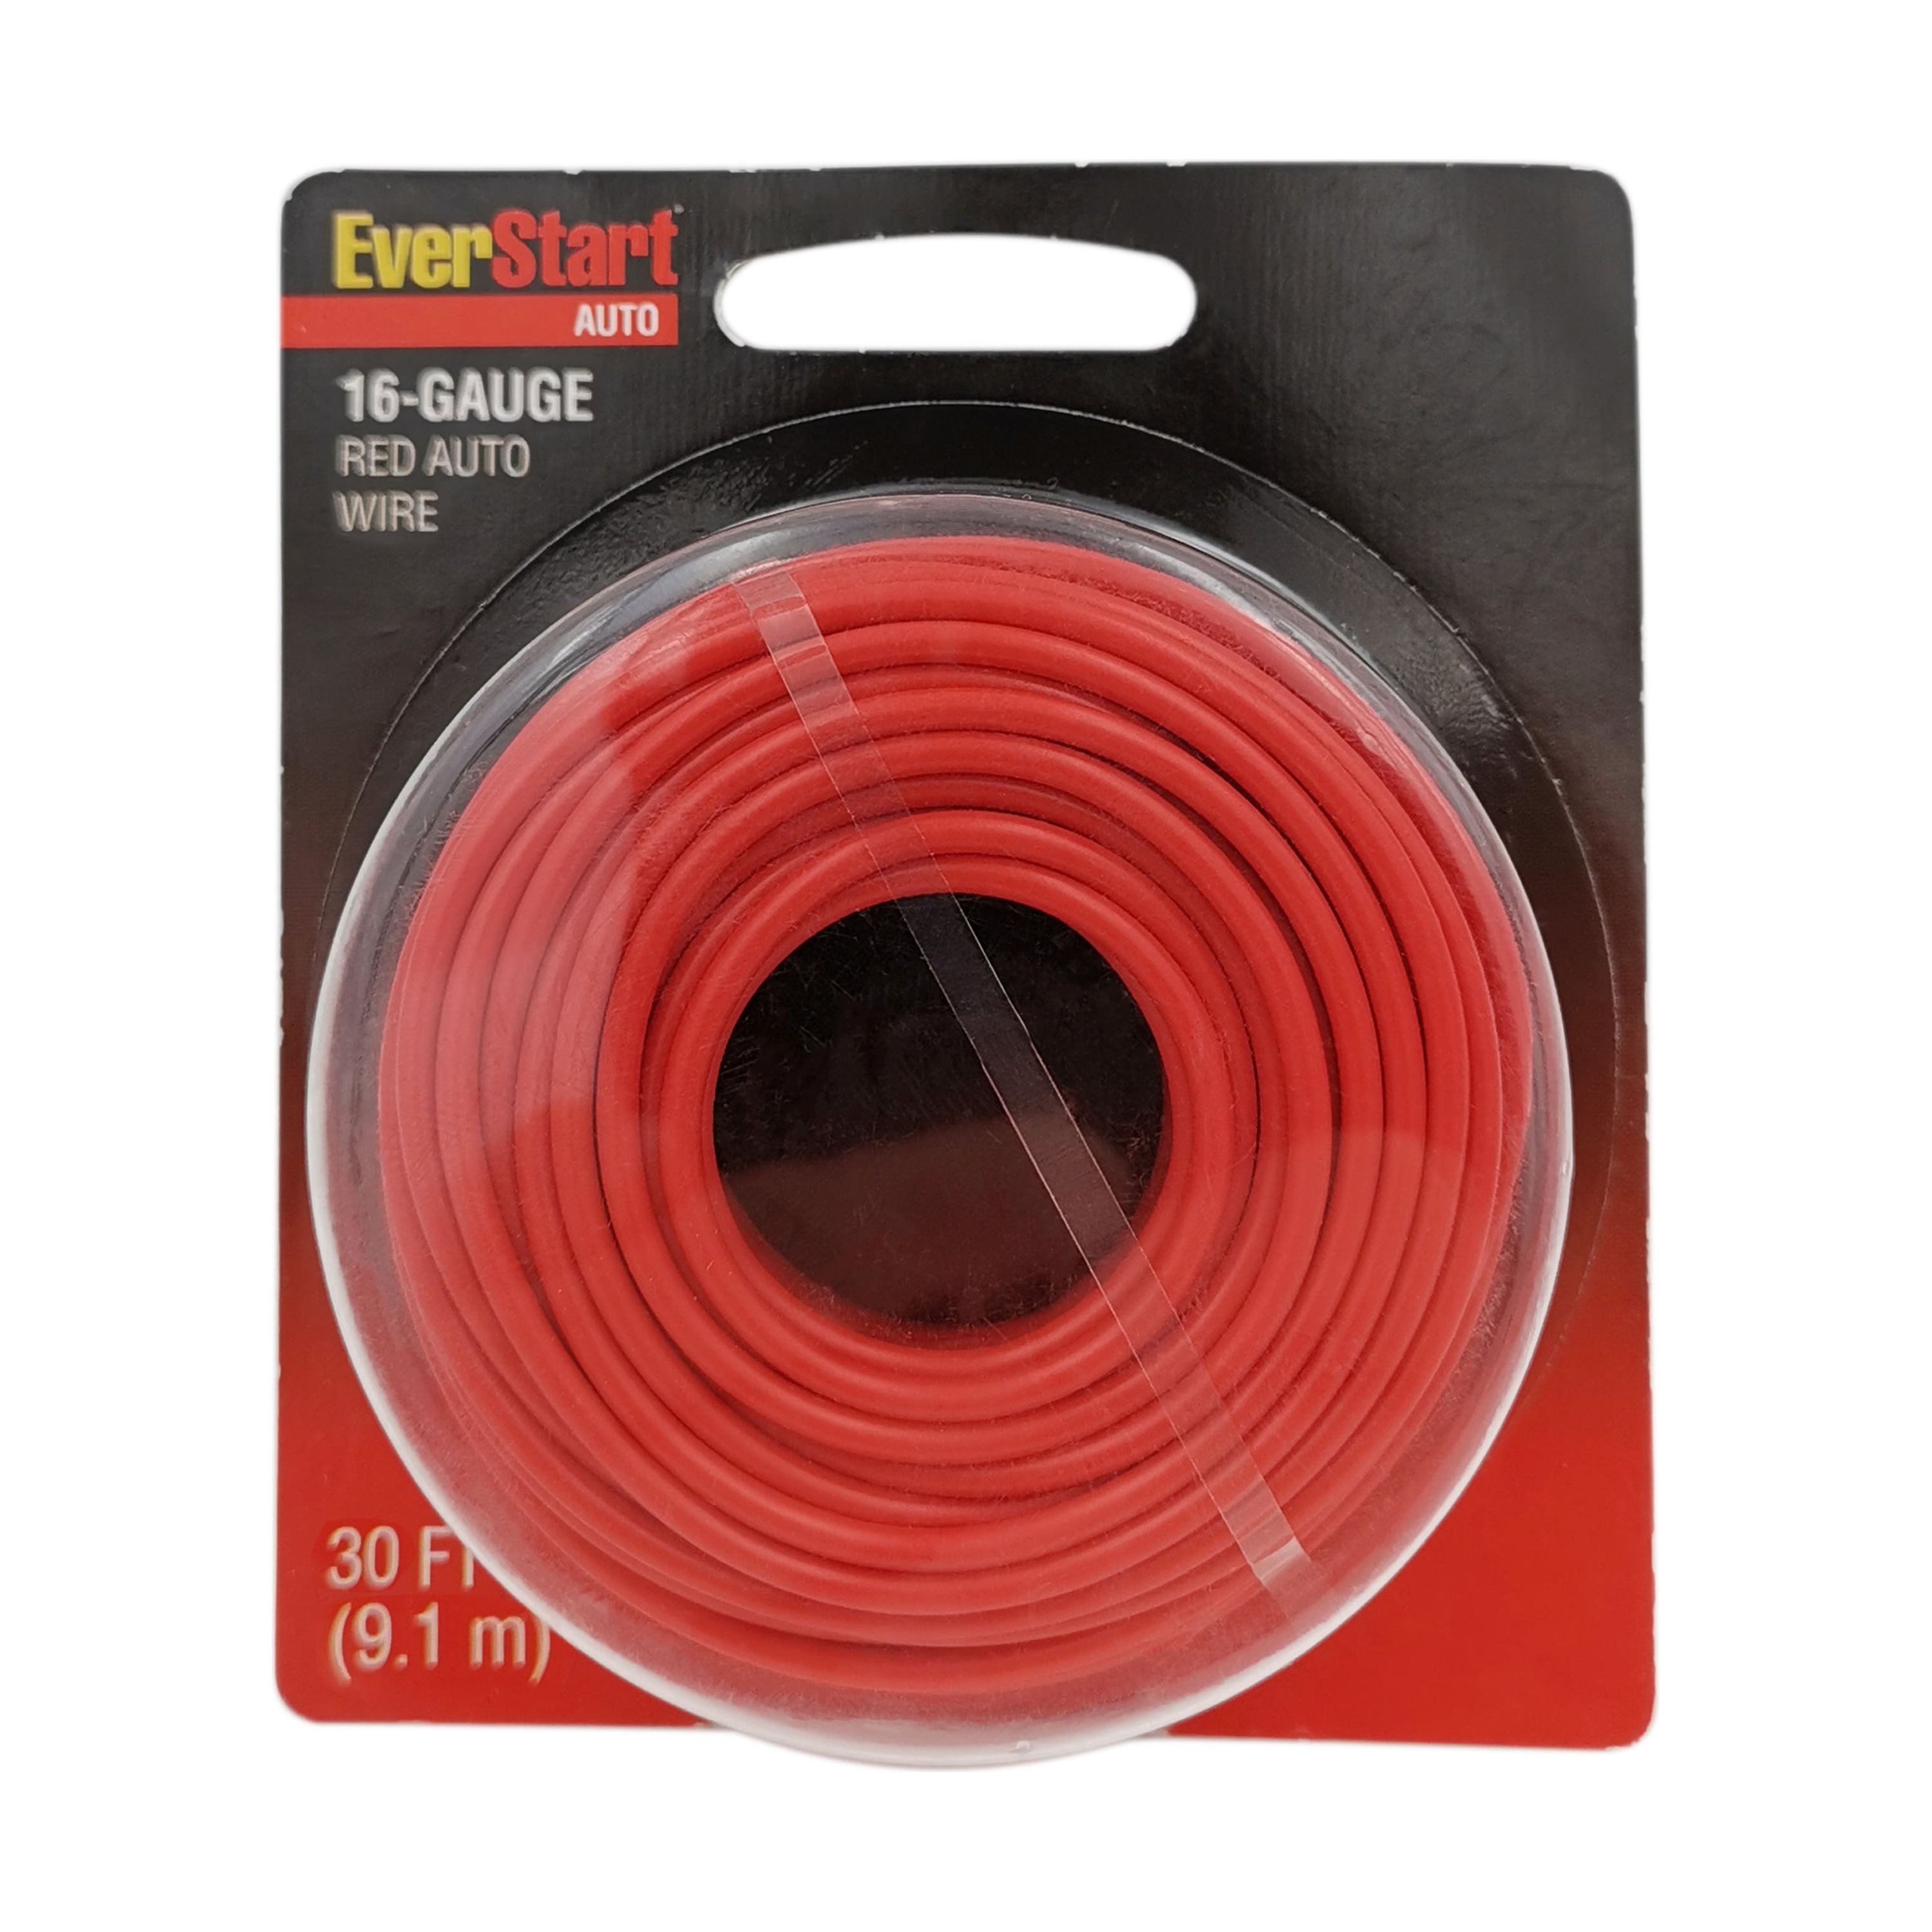 Everstart 30 Feet 16 Gauge Red Auto Wire Roll For Tail Lights, Coil Wire, Directional Signals, Gas Gauge, Heater Leads, Stop Signals, Home Light, Starter Relay, Instrument Lamps, Parking Lights - image 1 of 8